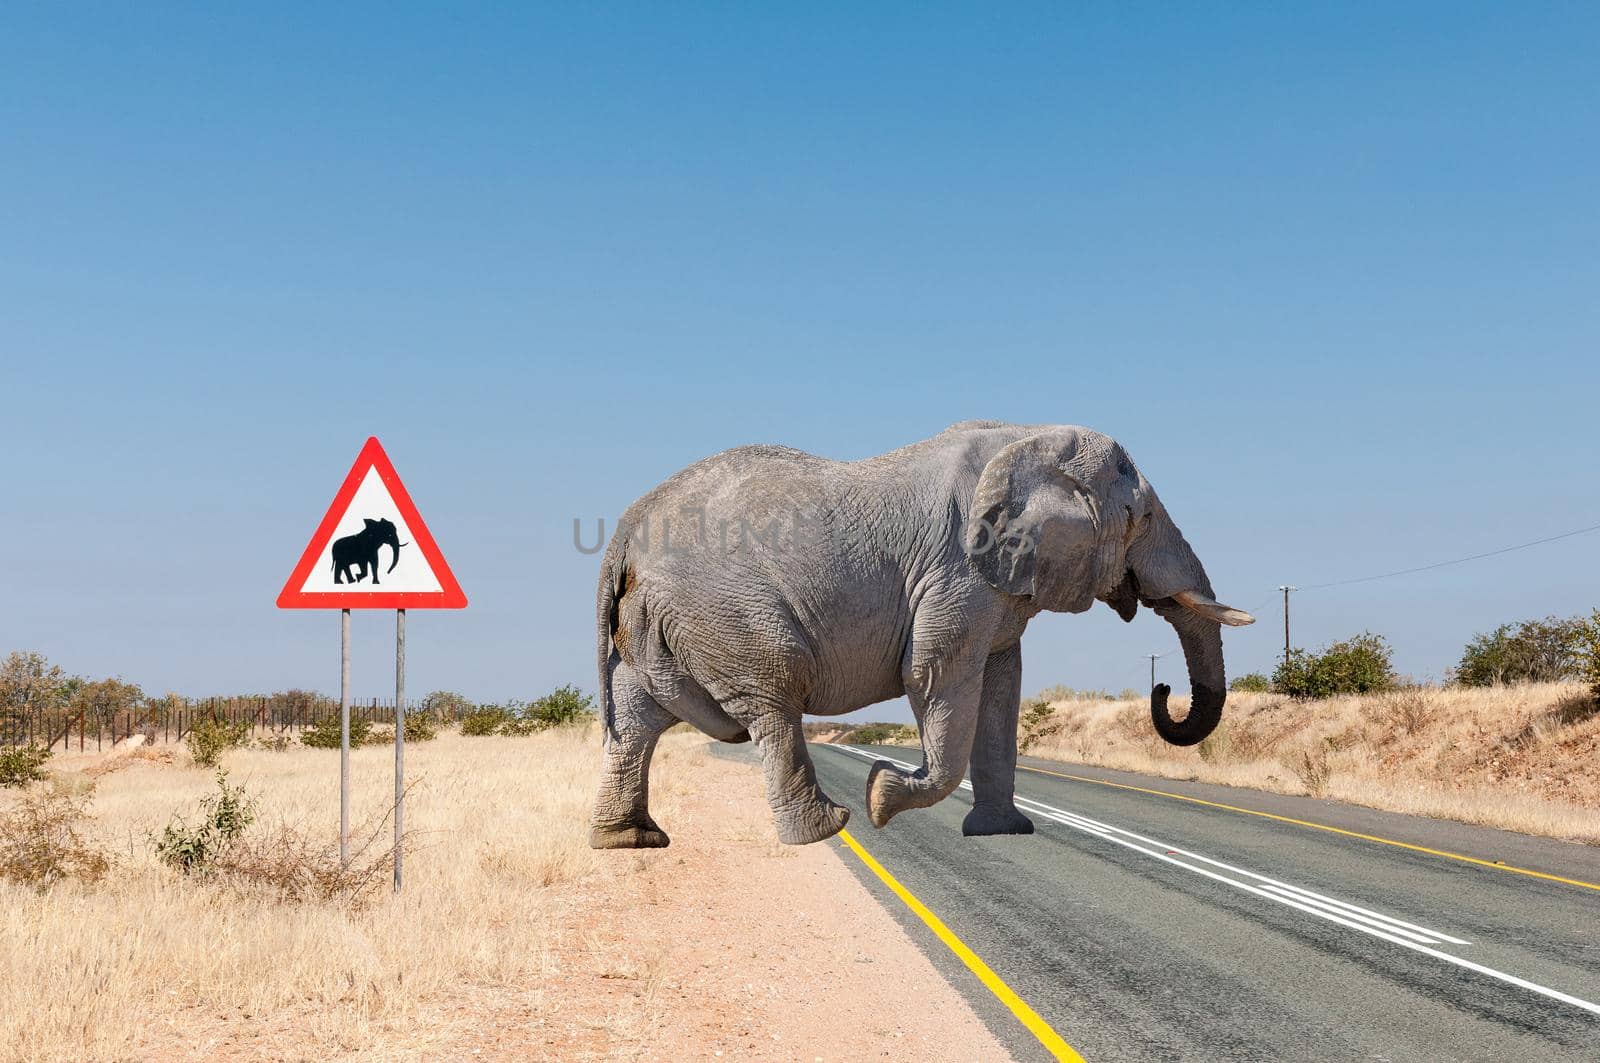 Elephant and warning road sign. Composite photo by dpreezg